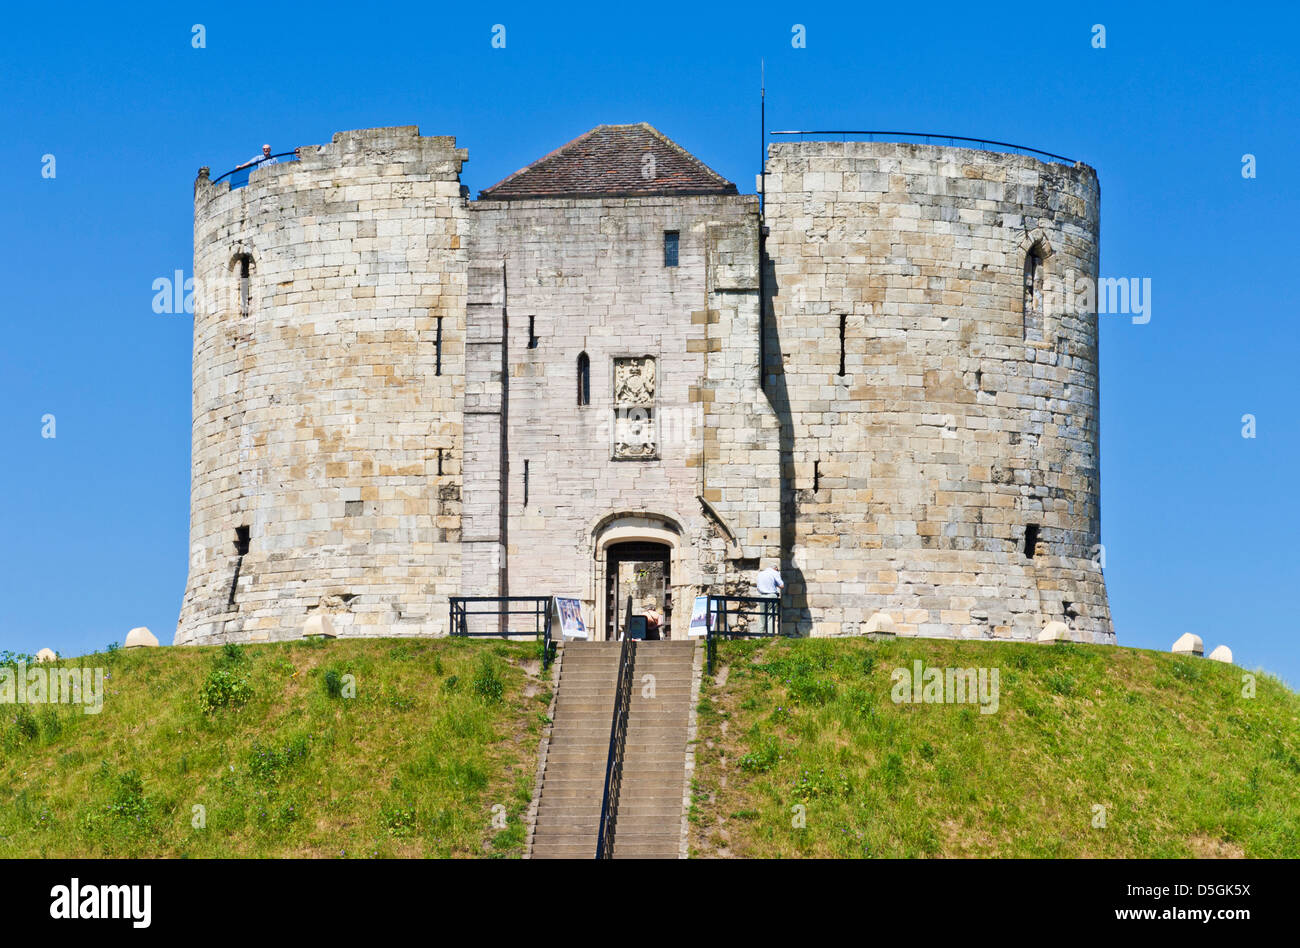 Clifford's Tower the former Keep of York castle city of York Yorkshire England UK GB EU Europe Stock Photo